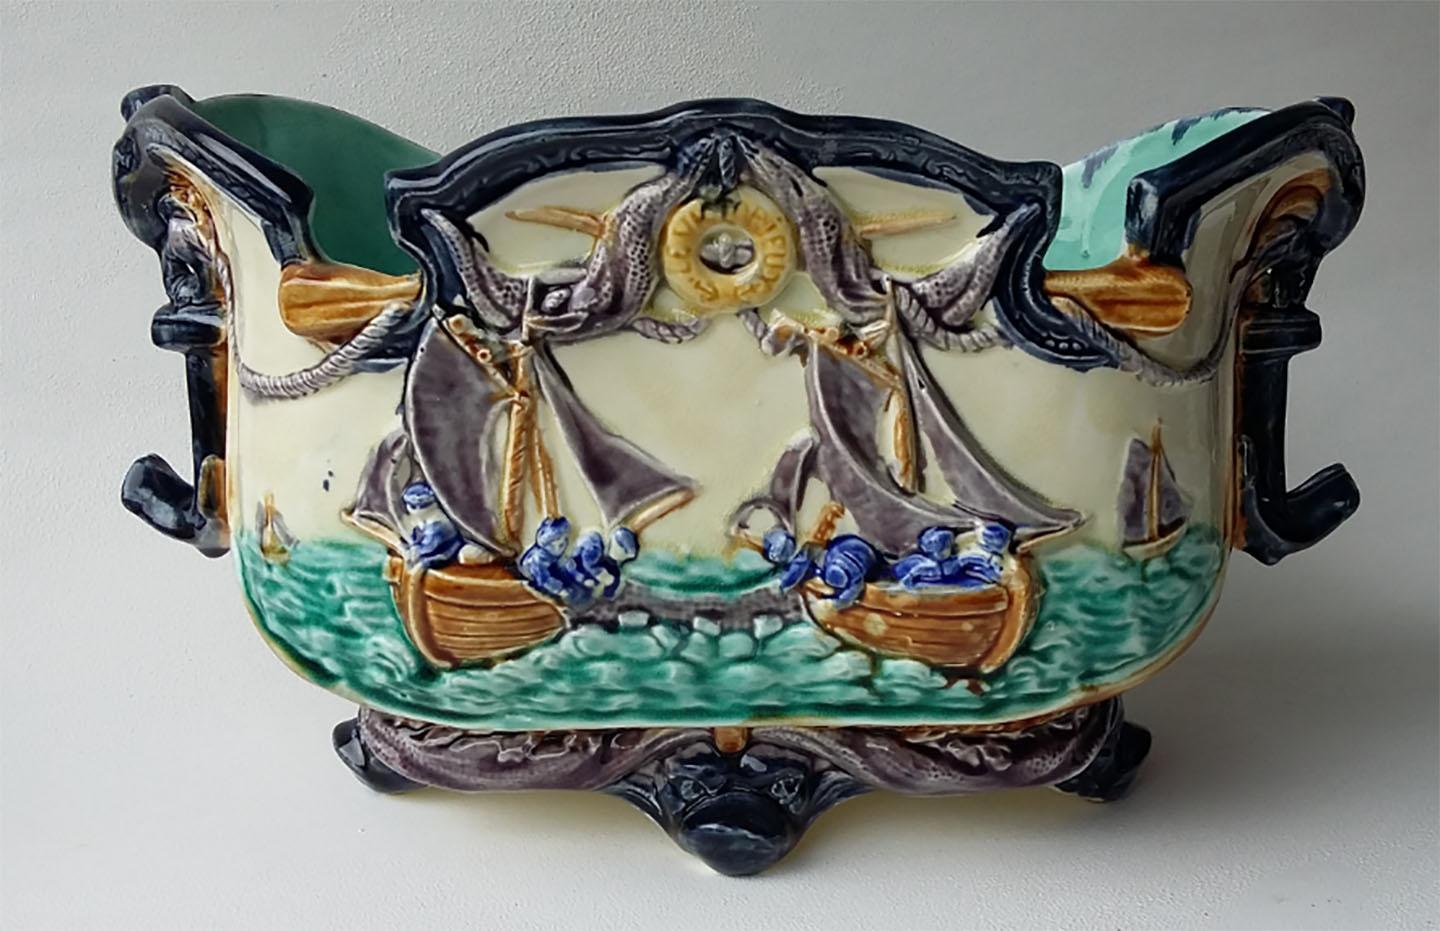 Rustic French Majolica Jardinière with Flowers Onnaing, circa 1890